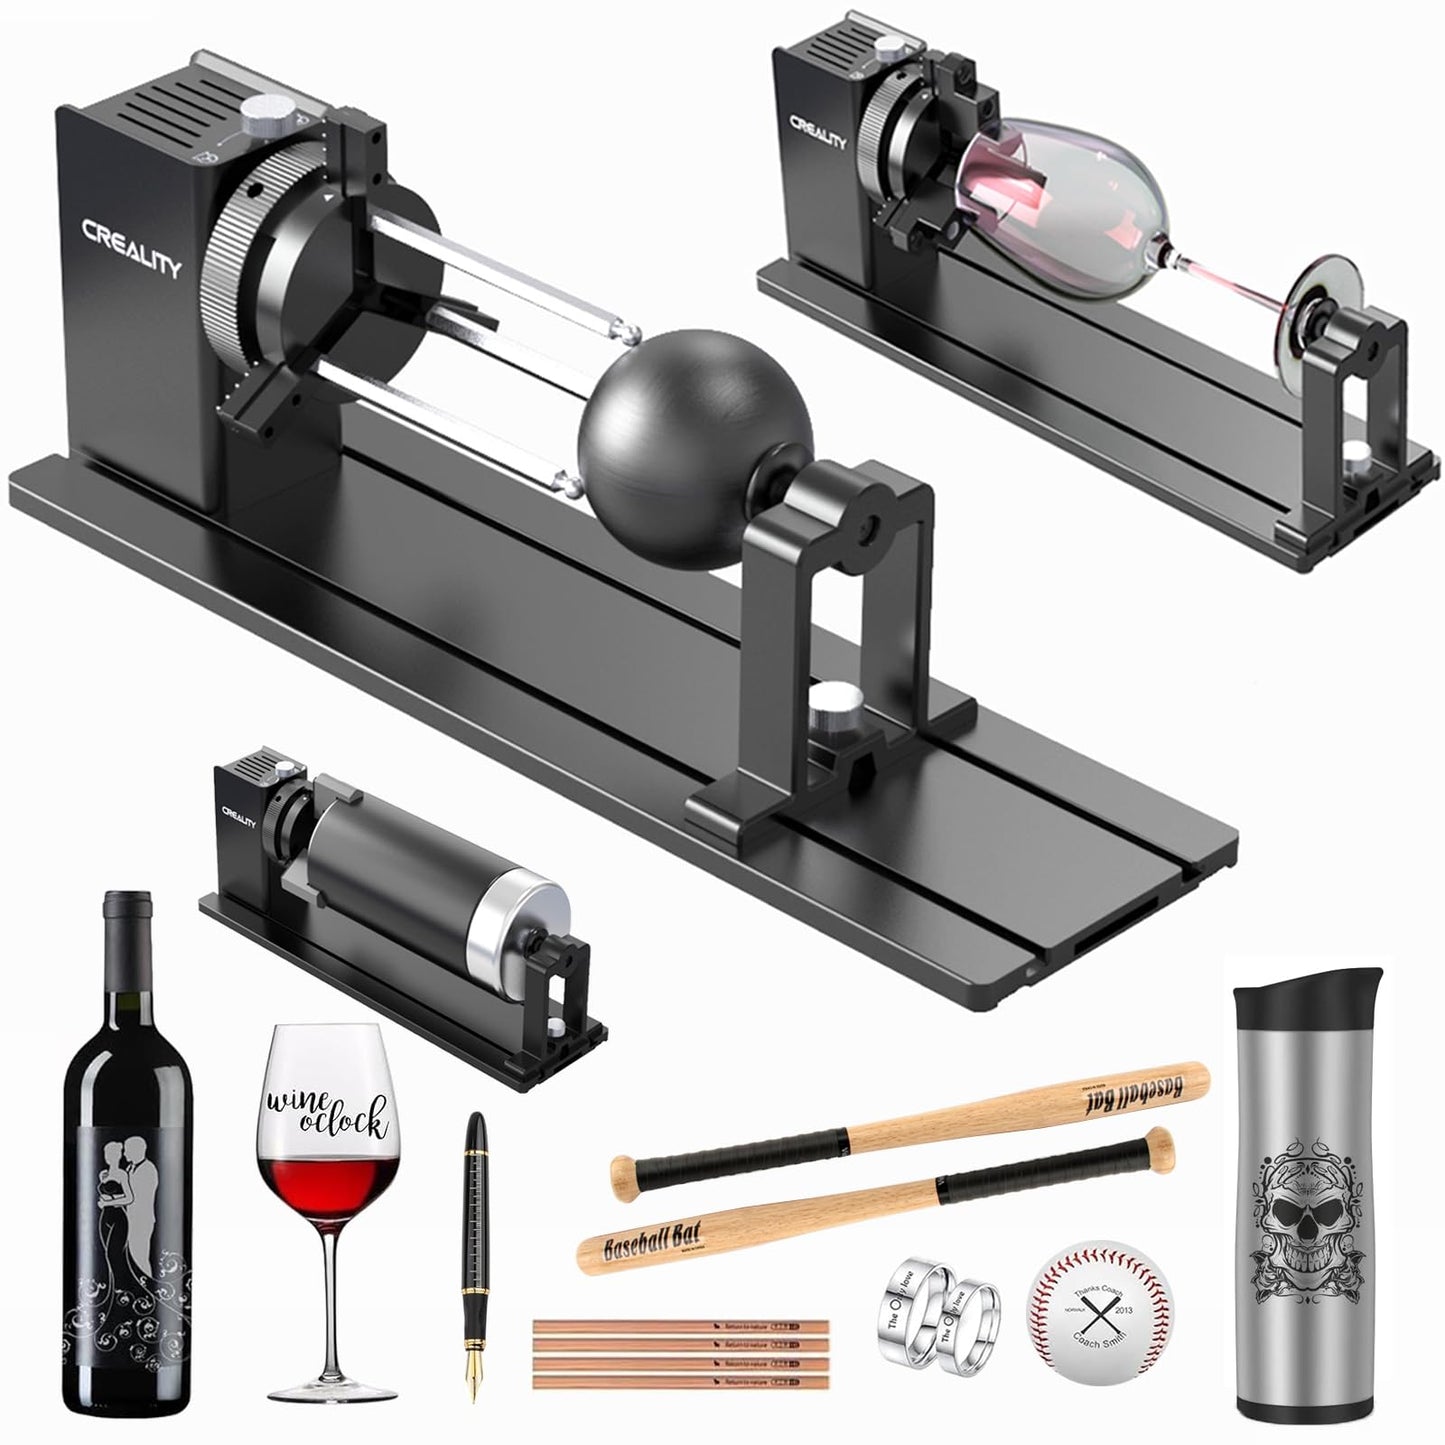 Creality Rotary Kit Pro, Laser Rotary Roller 3 in 1 Multi-Function Engraving Accessories for Laser Engraver, Jaw Chuck Rotary for Engraving Wine